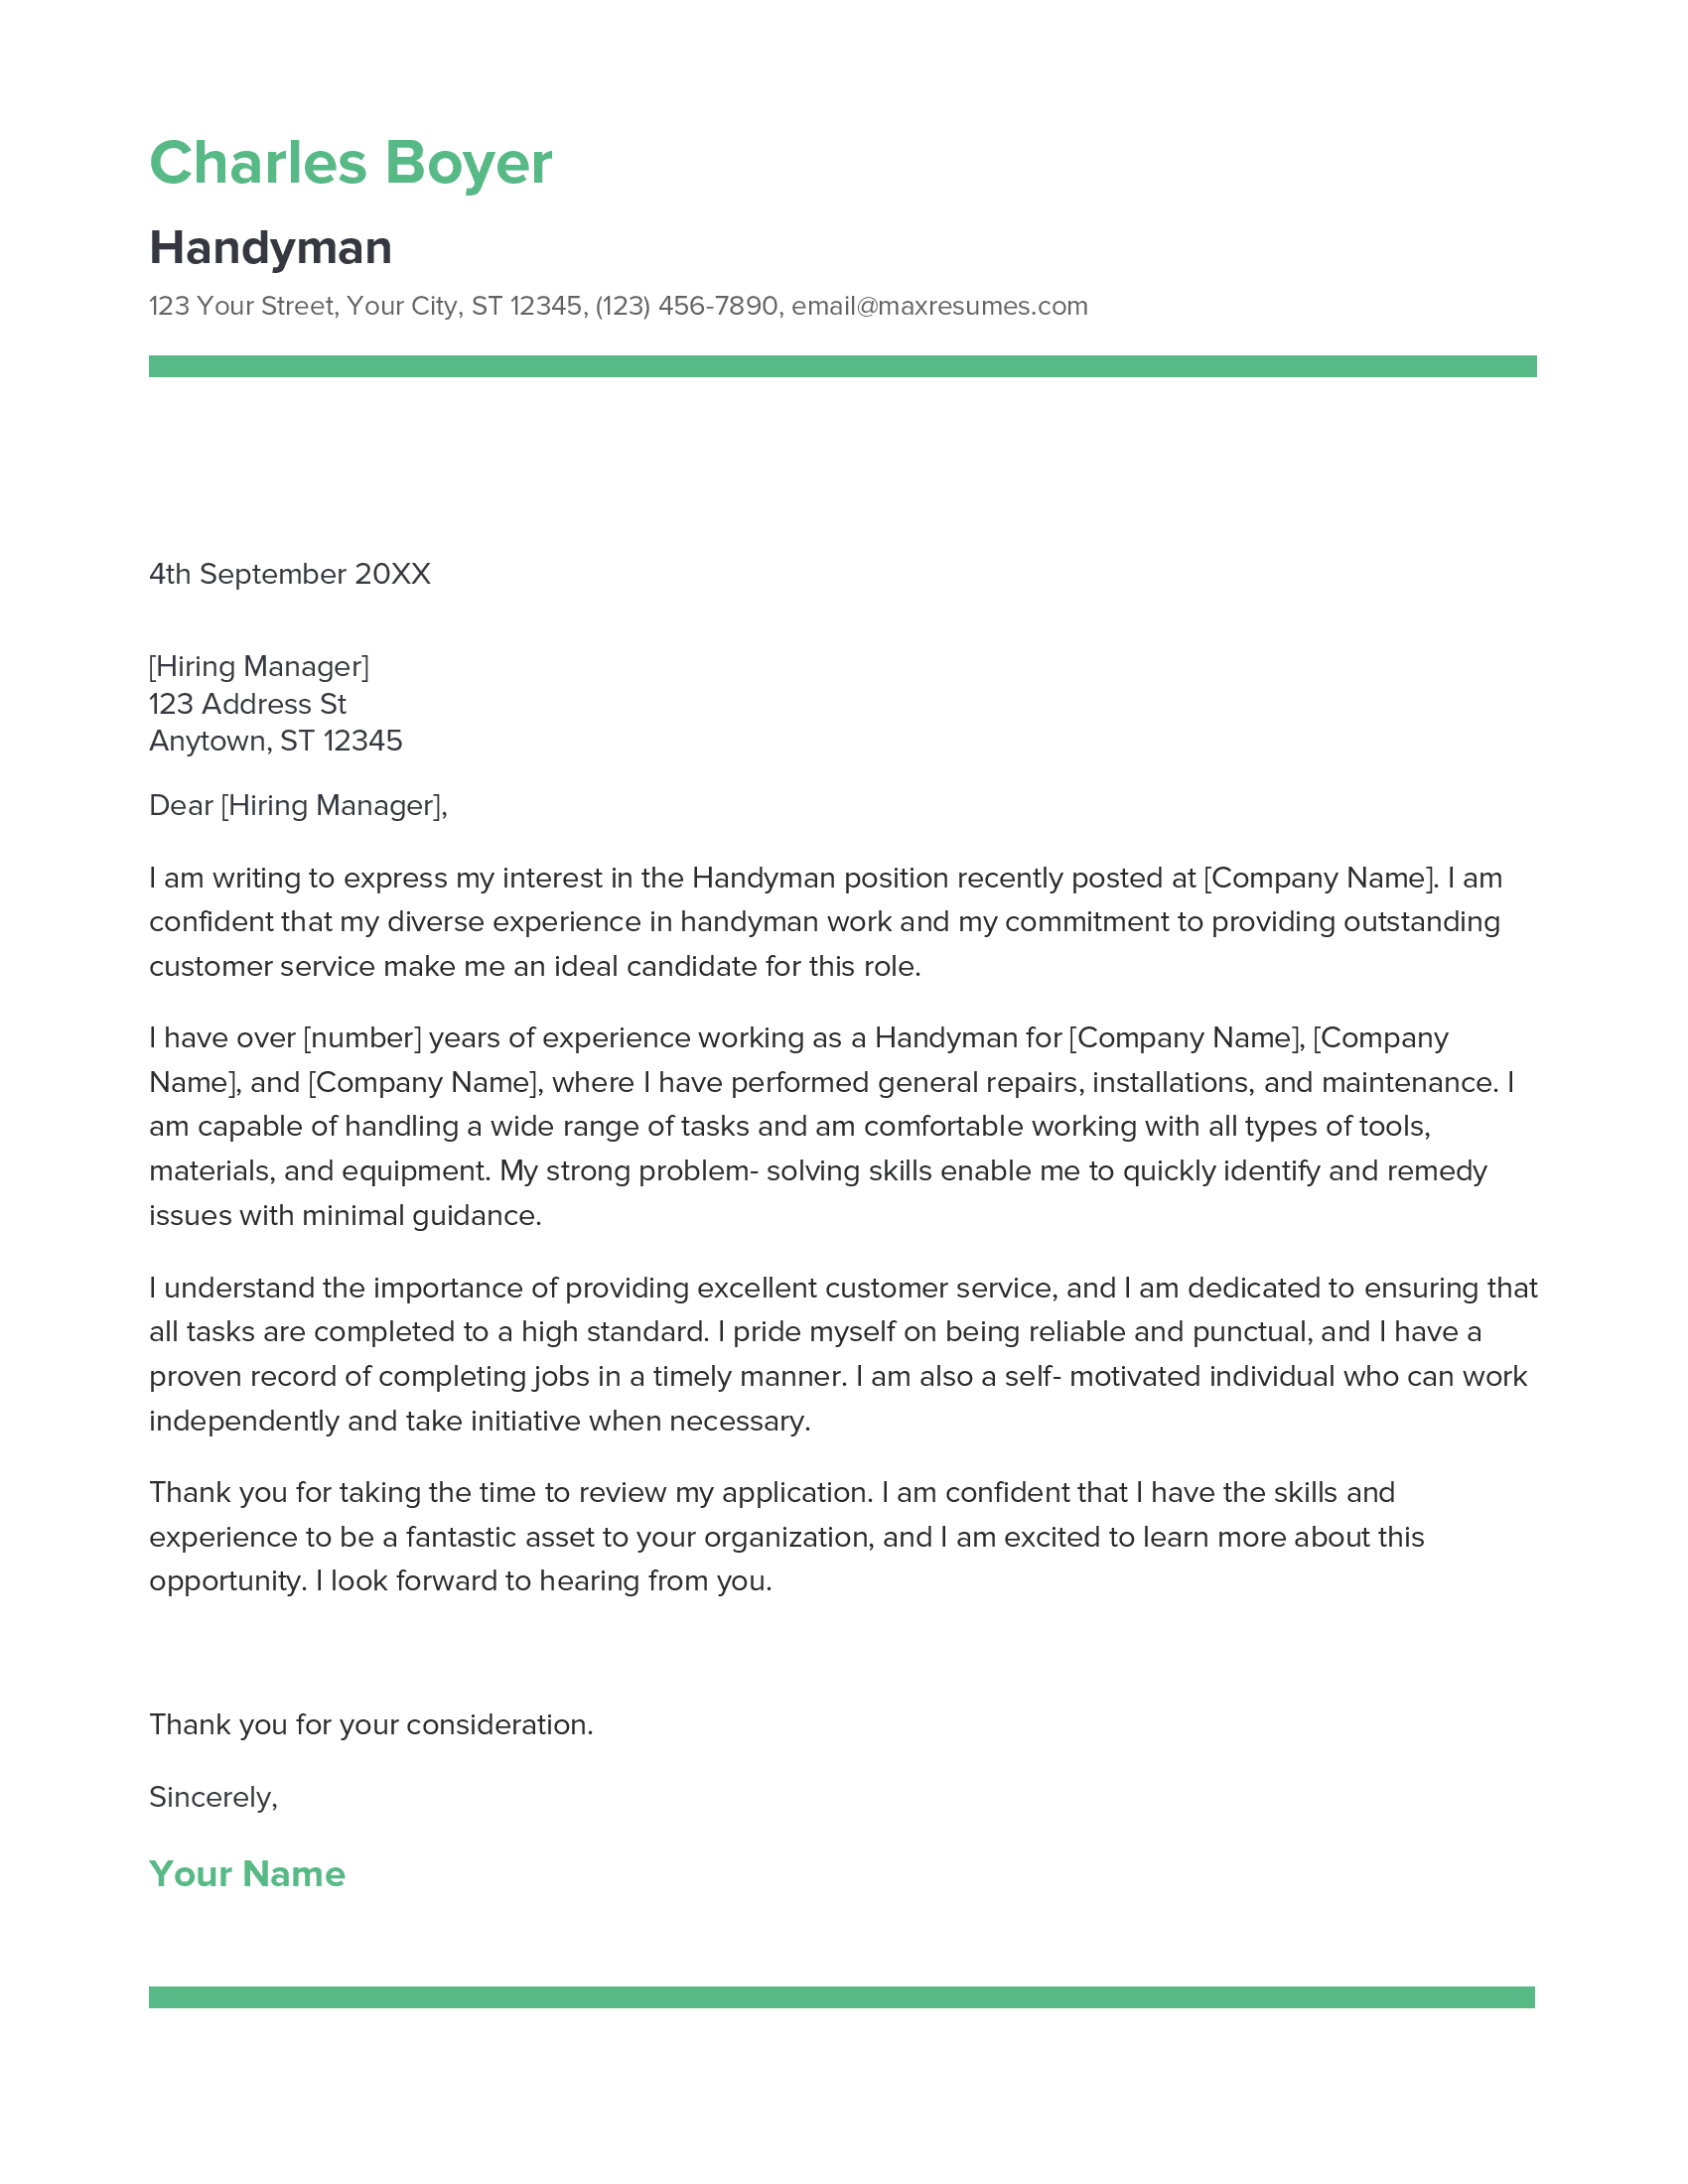 Handyman Cover Letter Example